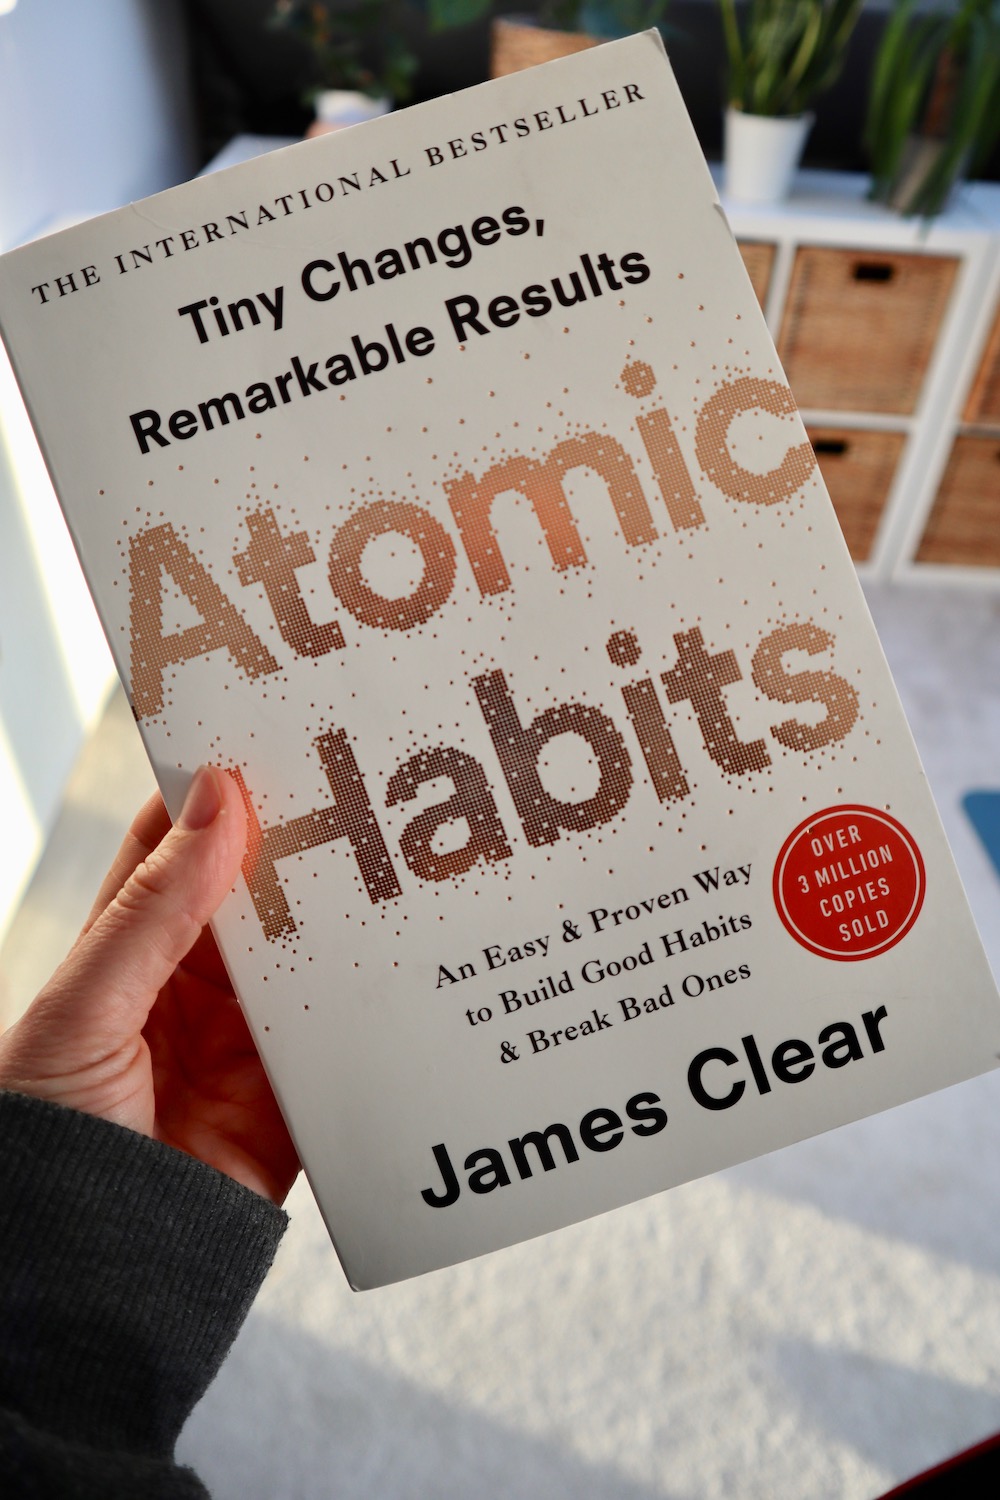 Atomic Habits download the last version for apple